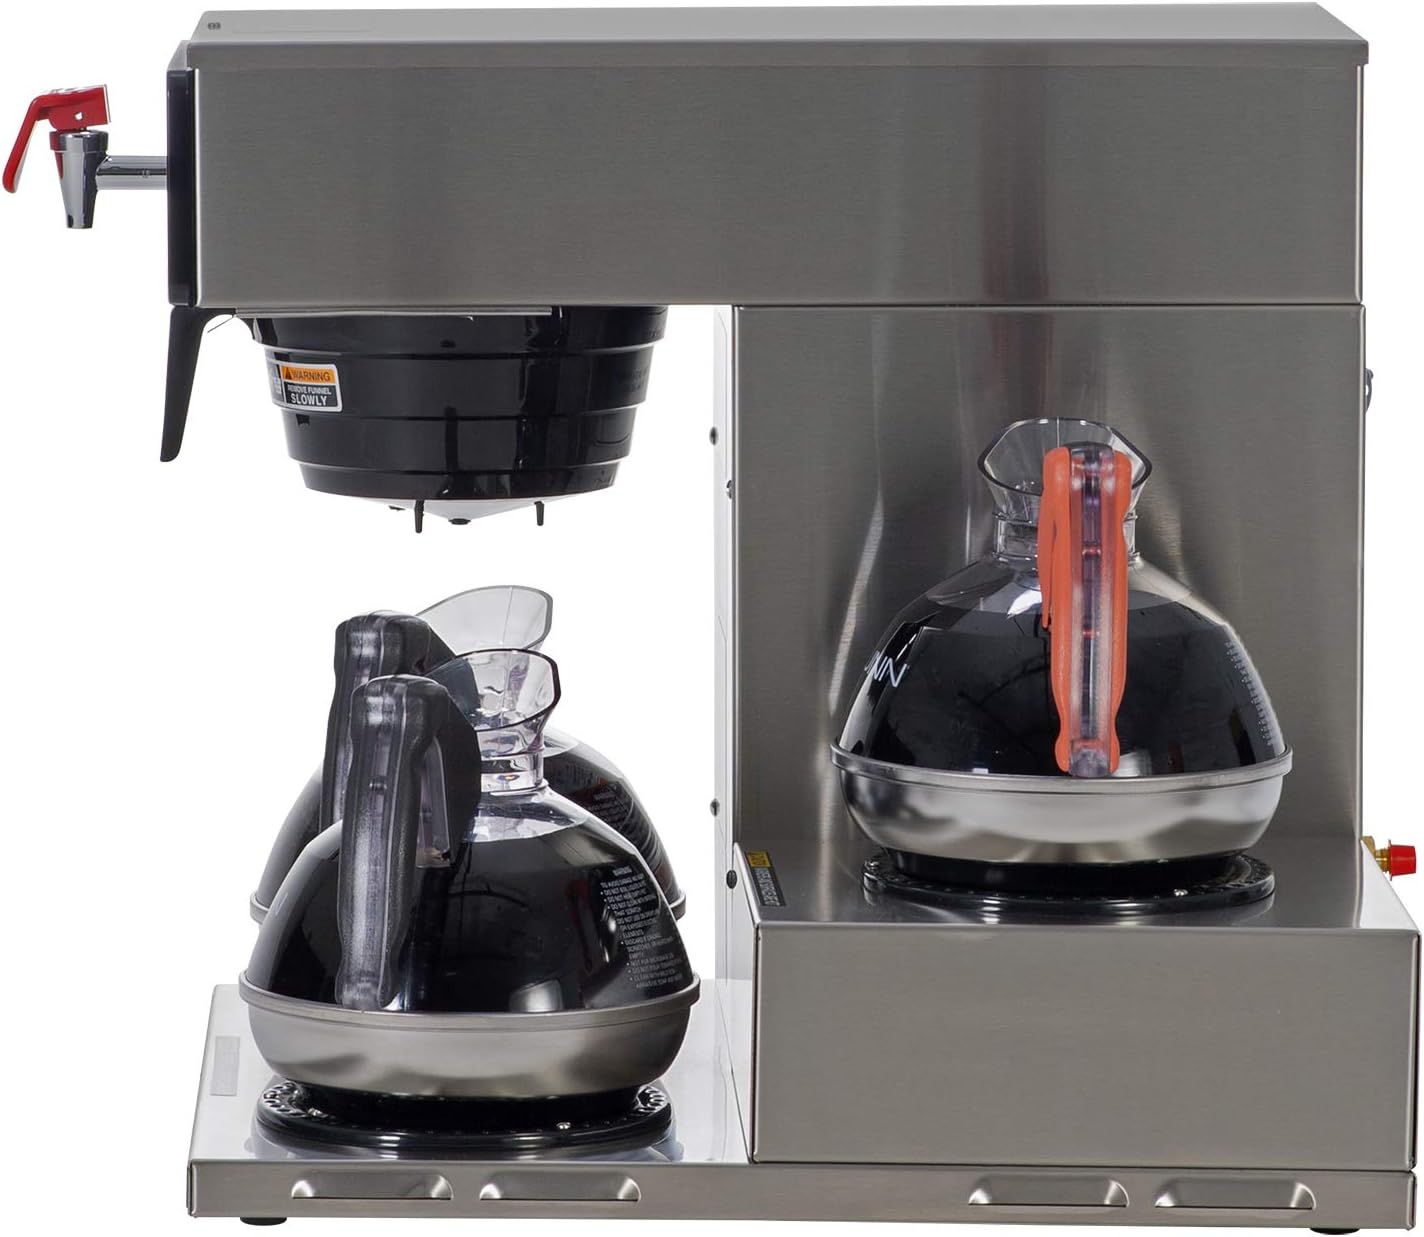 Bunn Axiom 15-3, Automatic Commercial 12-Cup Coffee Maker, 3 Lower Warmers, 38700.0002,Gray